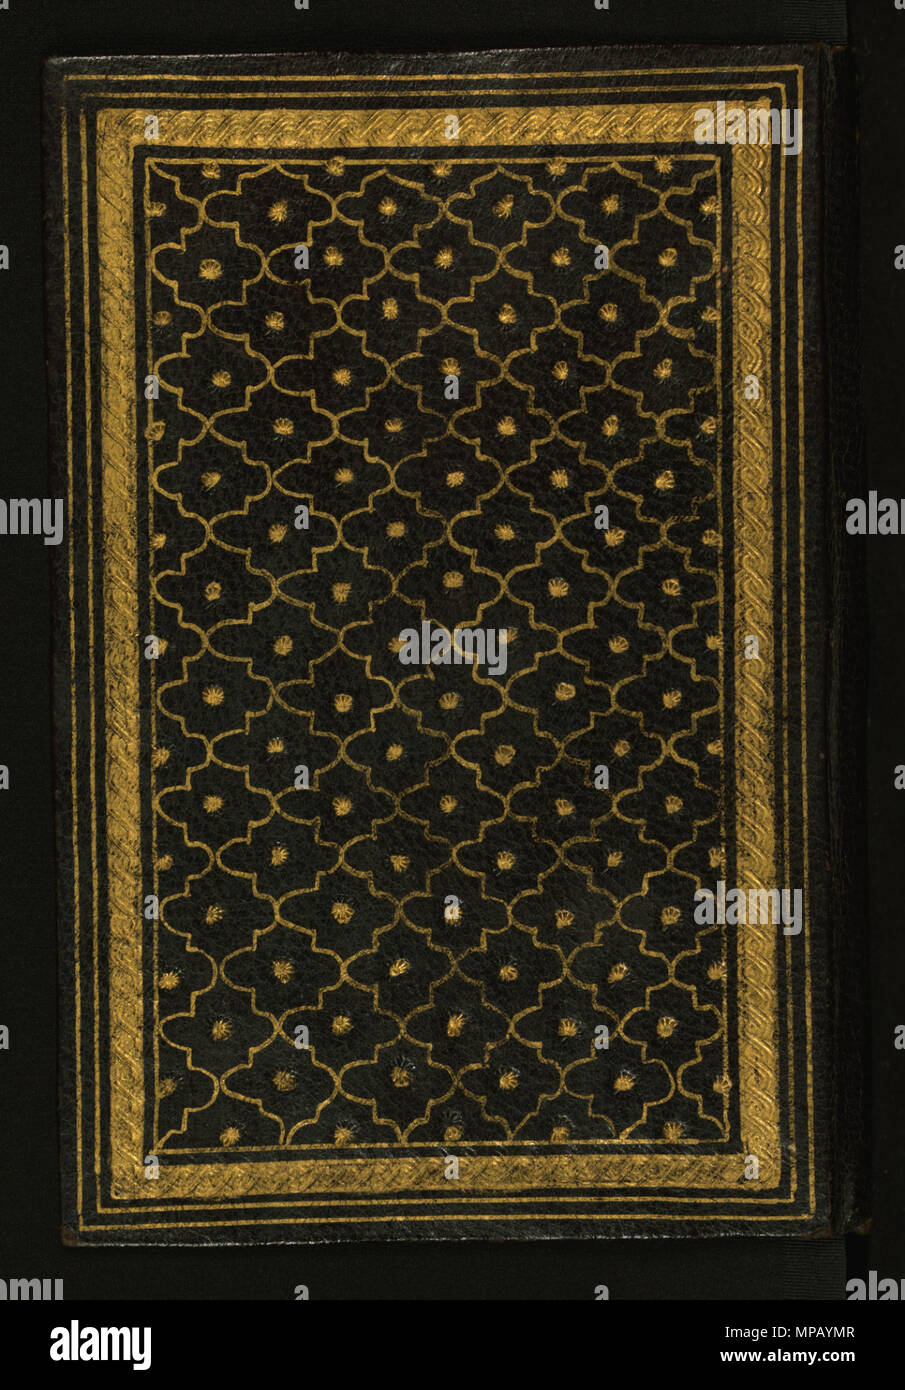 Anonymous (Islamic). 'Binding from Koran,' 1865-1866. black morocco with gold. Walters Art Museum (W.577.binding): Acquired by Henry Walters. W.577.binding 911 Muhammad ibn Mustafa Izmiri - Qur'an - Walters W577 - Closed Top View A Stock Photo